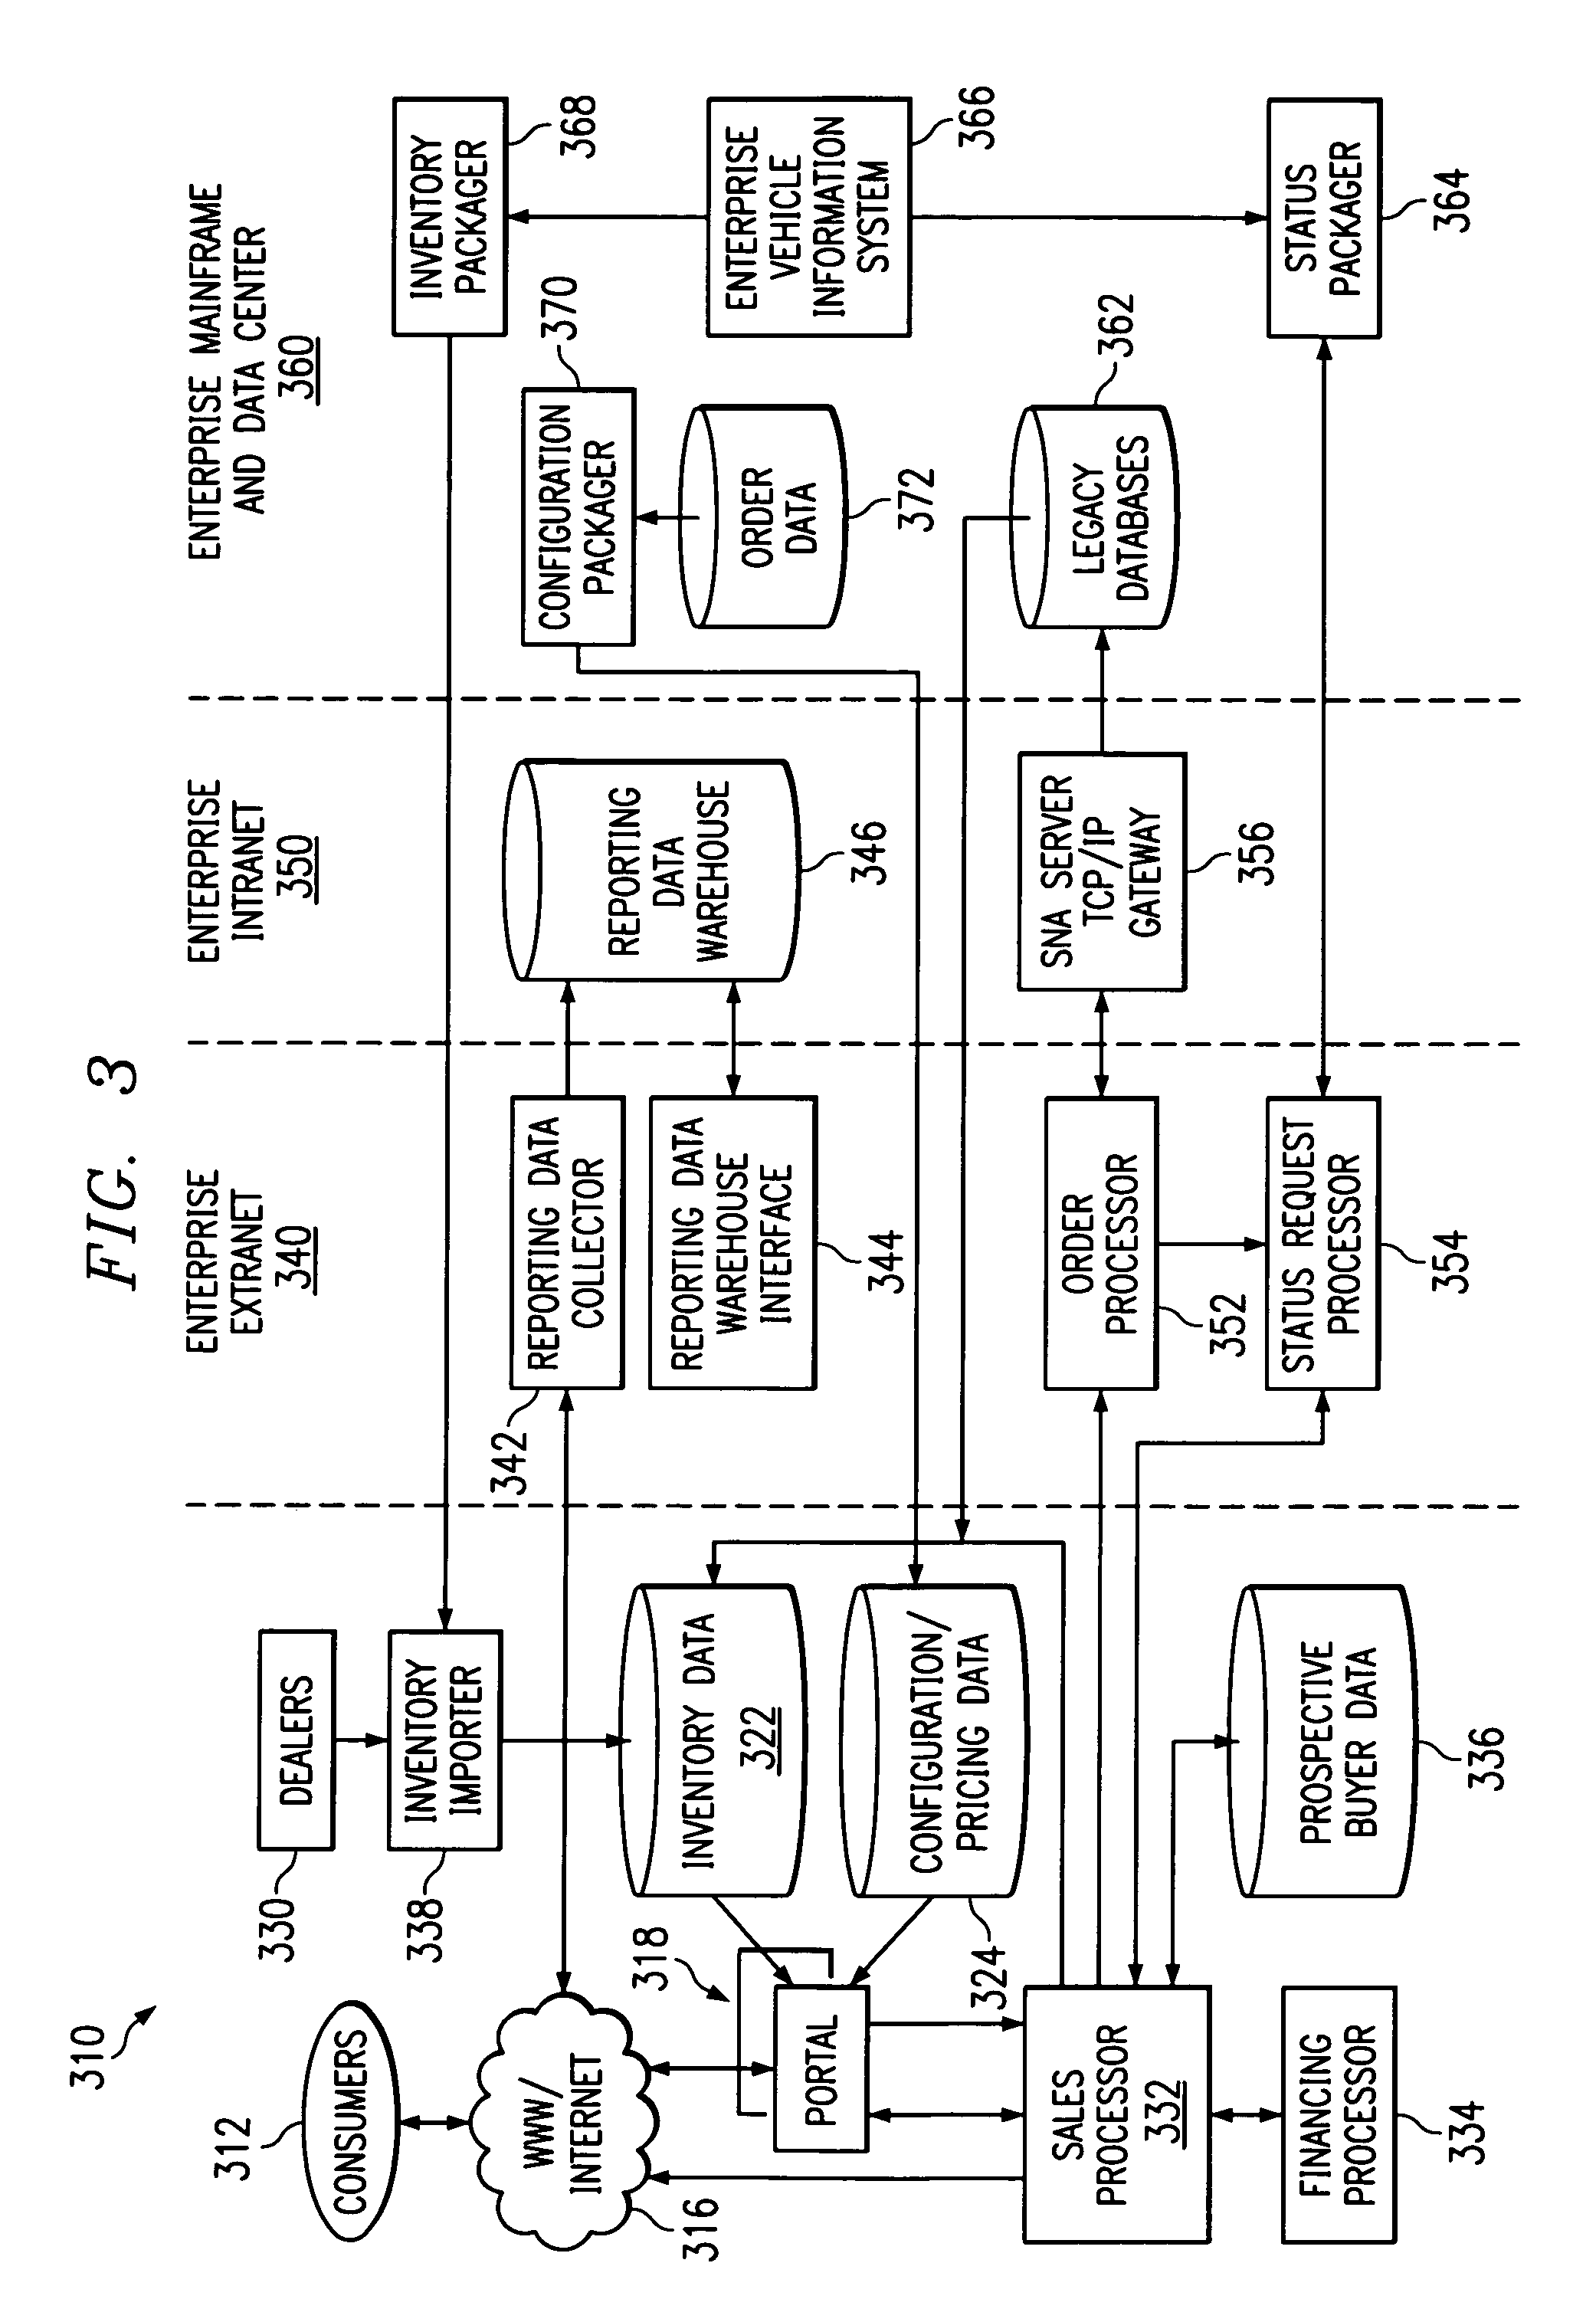 Online system and method of status inquiry and tracking related to orders for consumer product having specific configurations